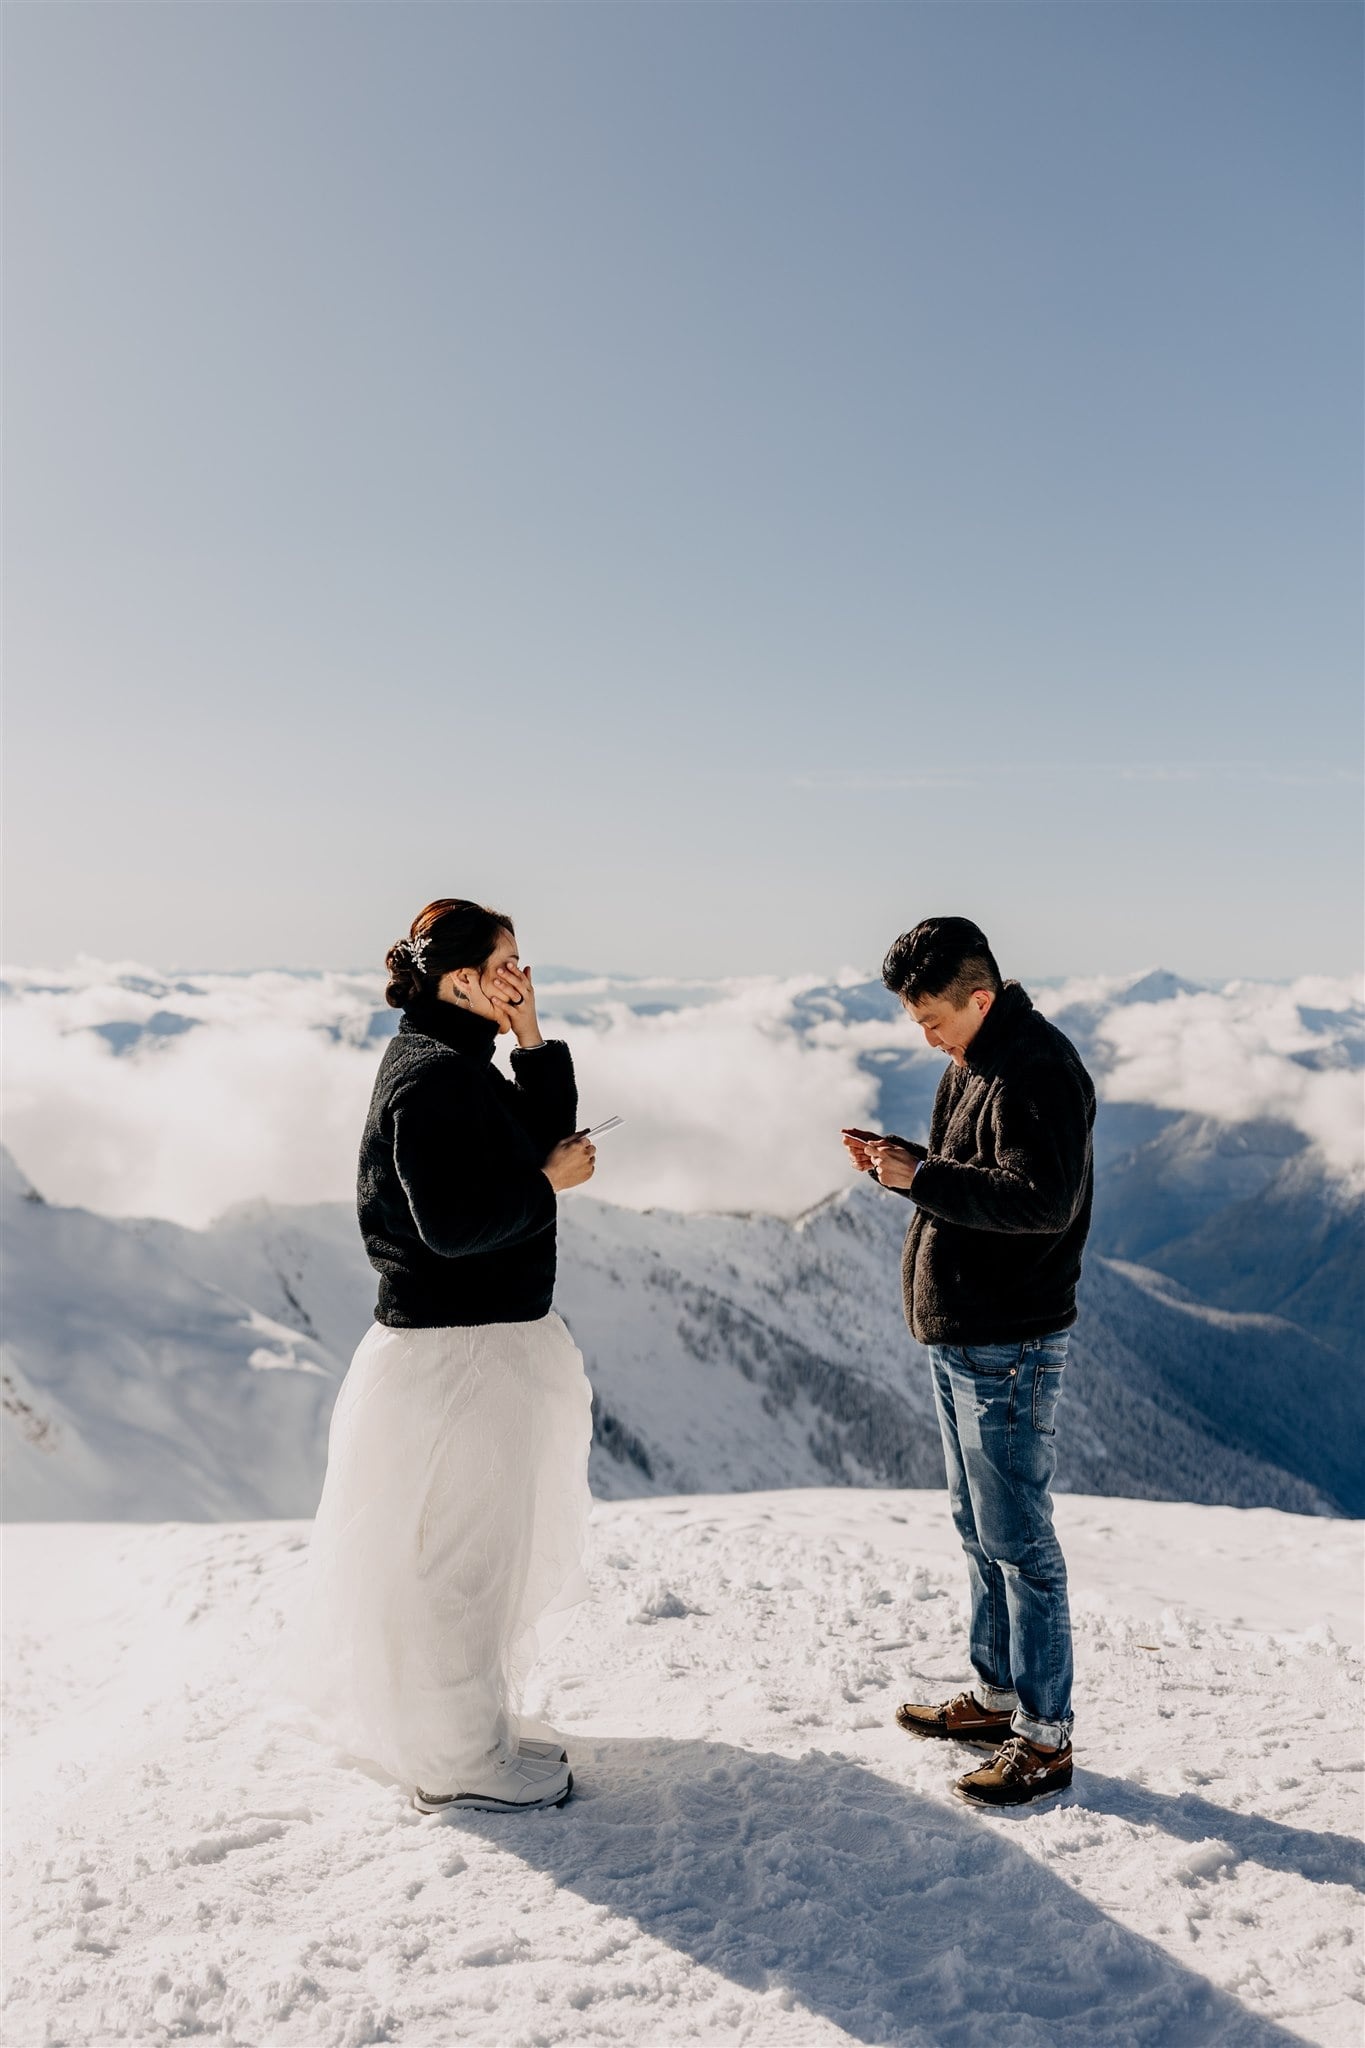 squamish-helicopter-elopement-aileen-choi-photo-stephany-like-4-min